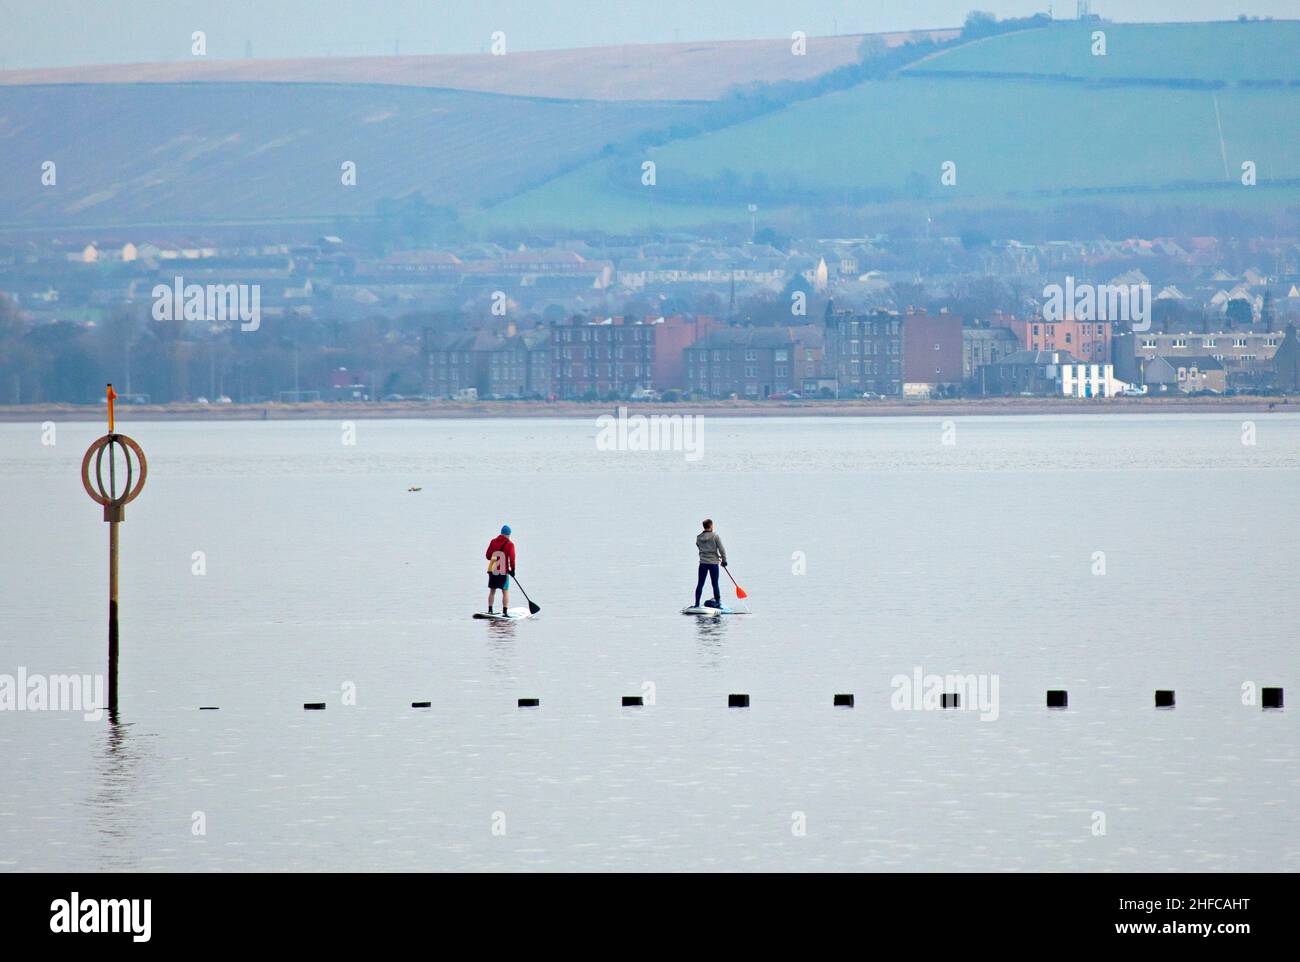 Portobello, Edinburgh, Scotland, UK. 15th January 2022.  Calm Firth of Forth for another cloudy afternoon, temperature of 7 degrees centigrade for those engaged in watersports. Pictured: Two males on paddleboards enjoy the calm conditions with East Lothian in the background. Credit: Archwhite/Alamy Live News. Stock Photo